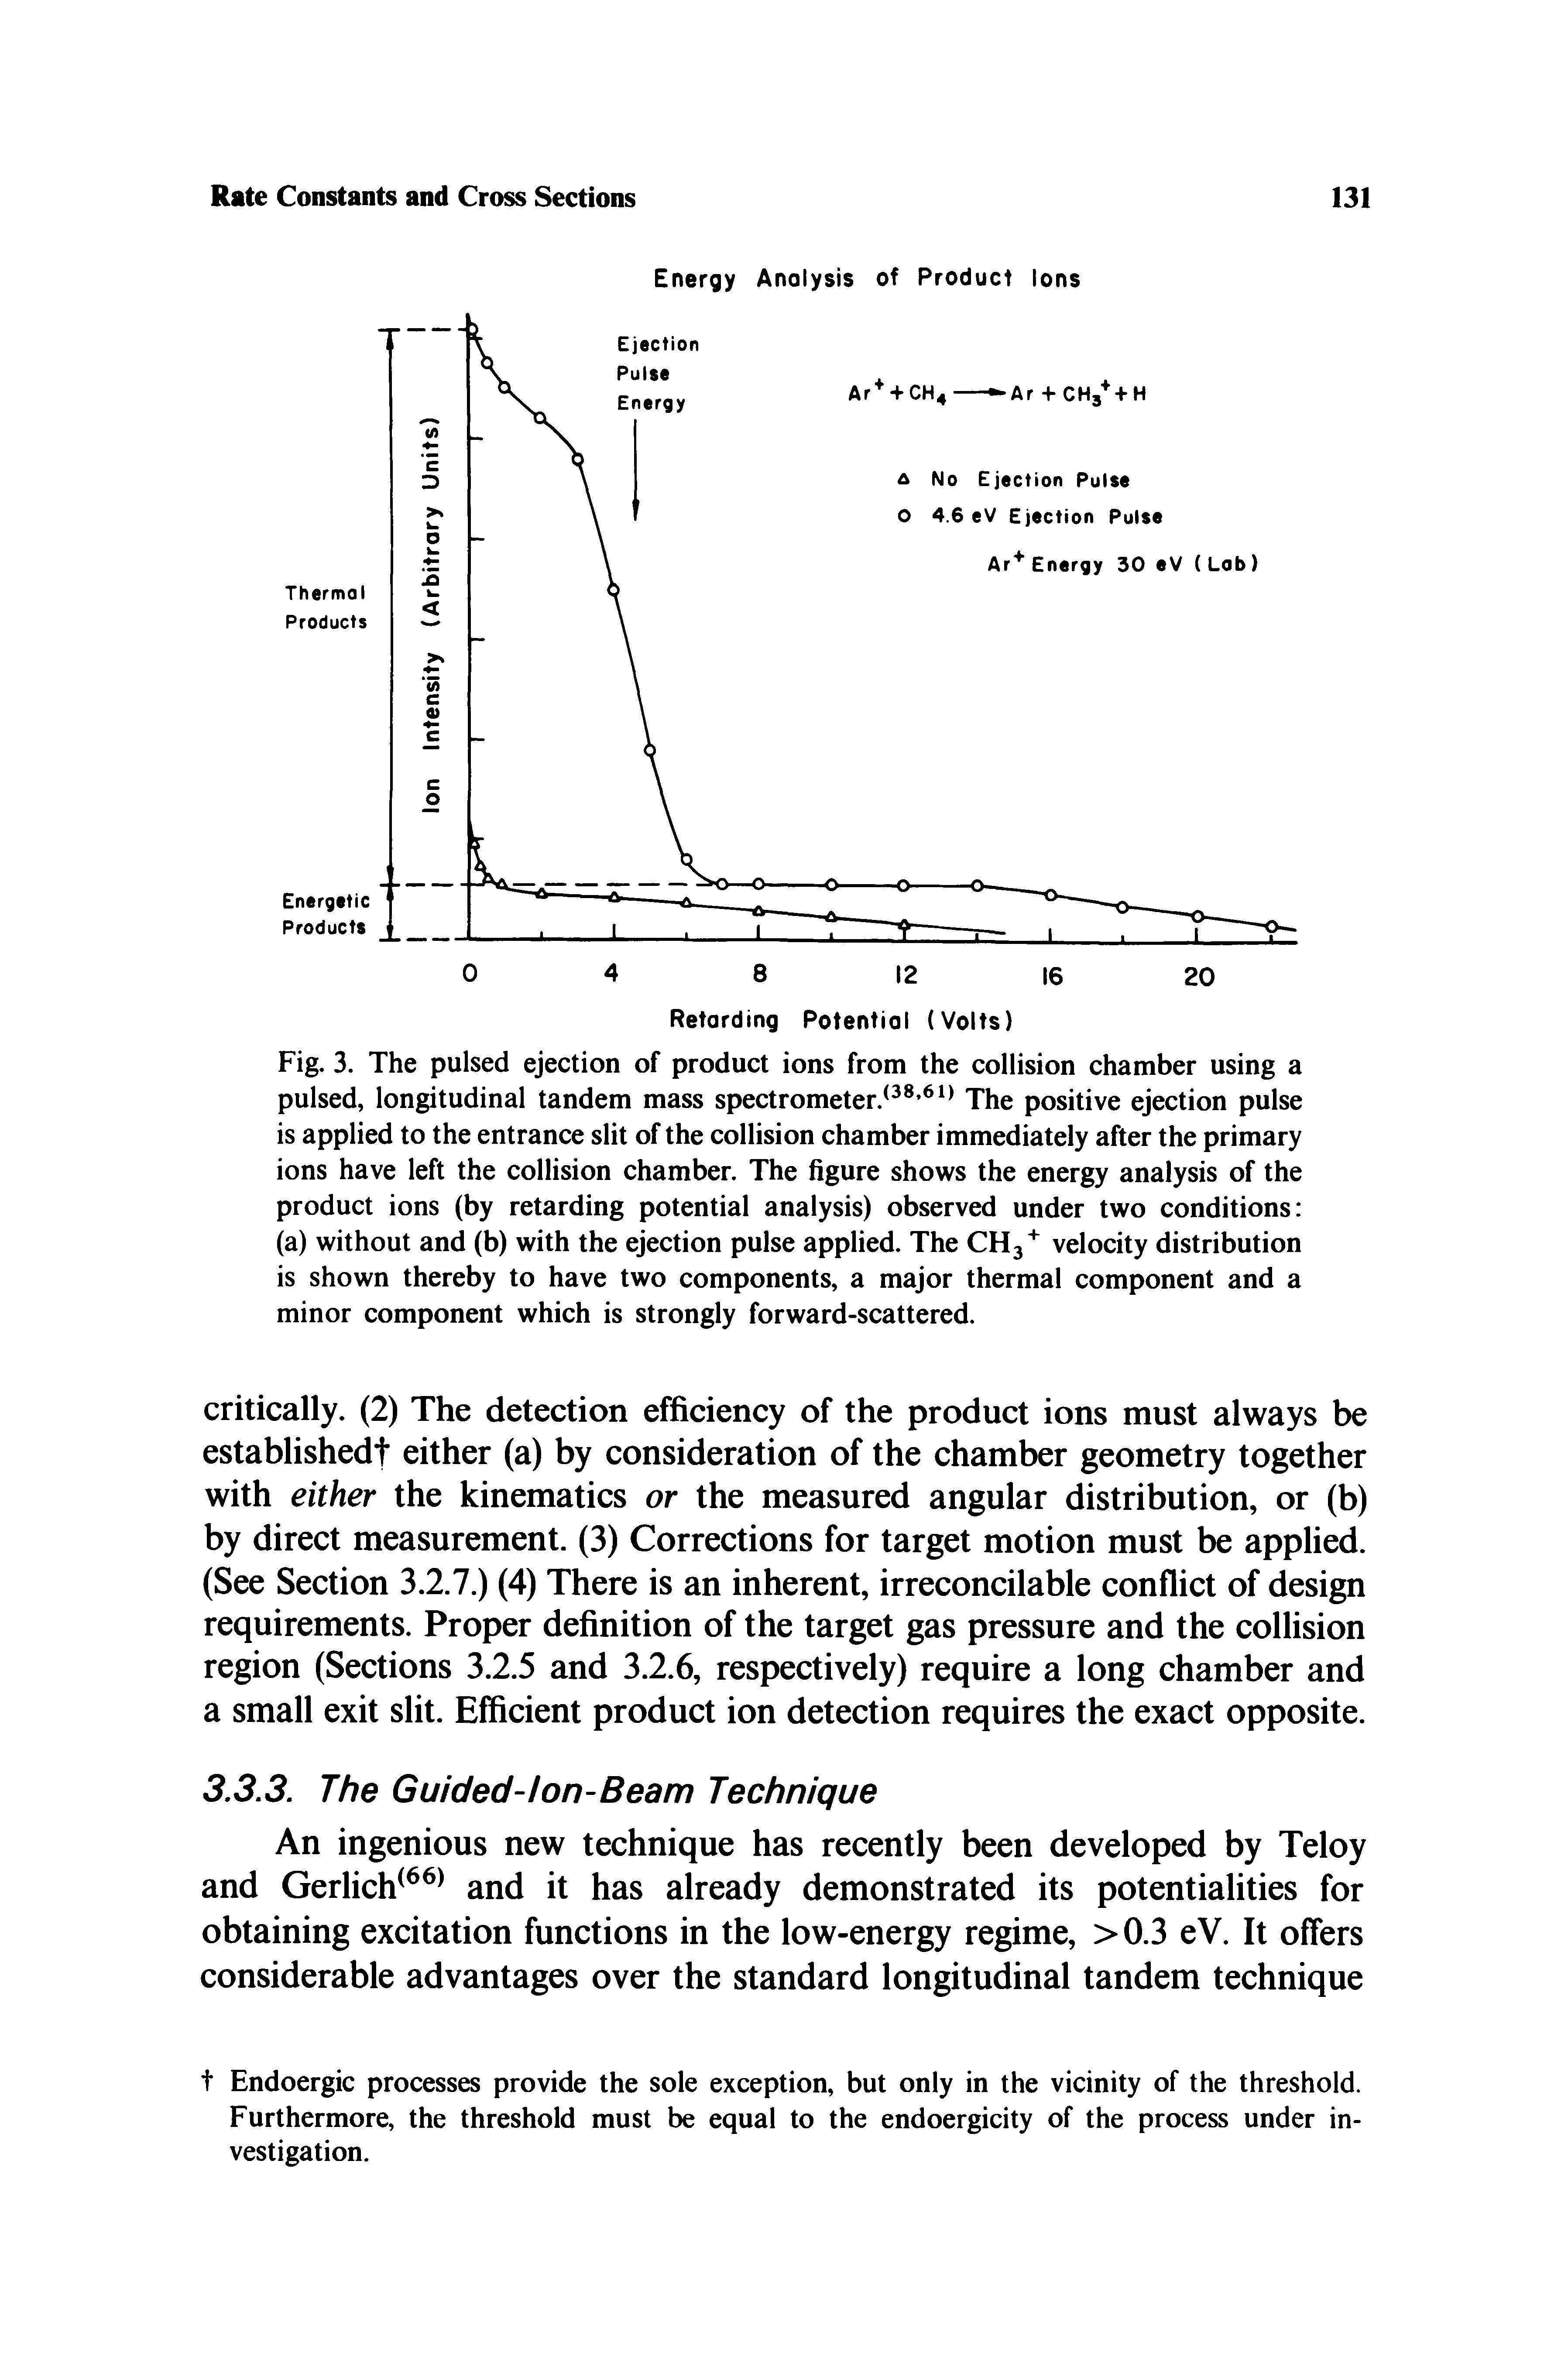 Fig. 3. The pulsed ejection of product ions from the collision chamber using a pulsed, longitudinal tandem mass spectrometer. The positive ejection pulse is applied to the entrance slit of the collision chamber immediately after the primary ions have left the collision chamber. The figure shows the energy analysis of the product ions (by retarding potential analysis) observed under two conditions ...